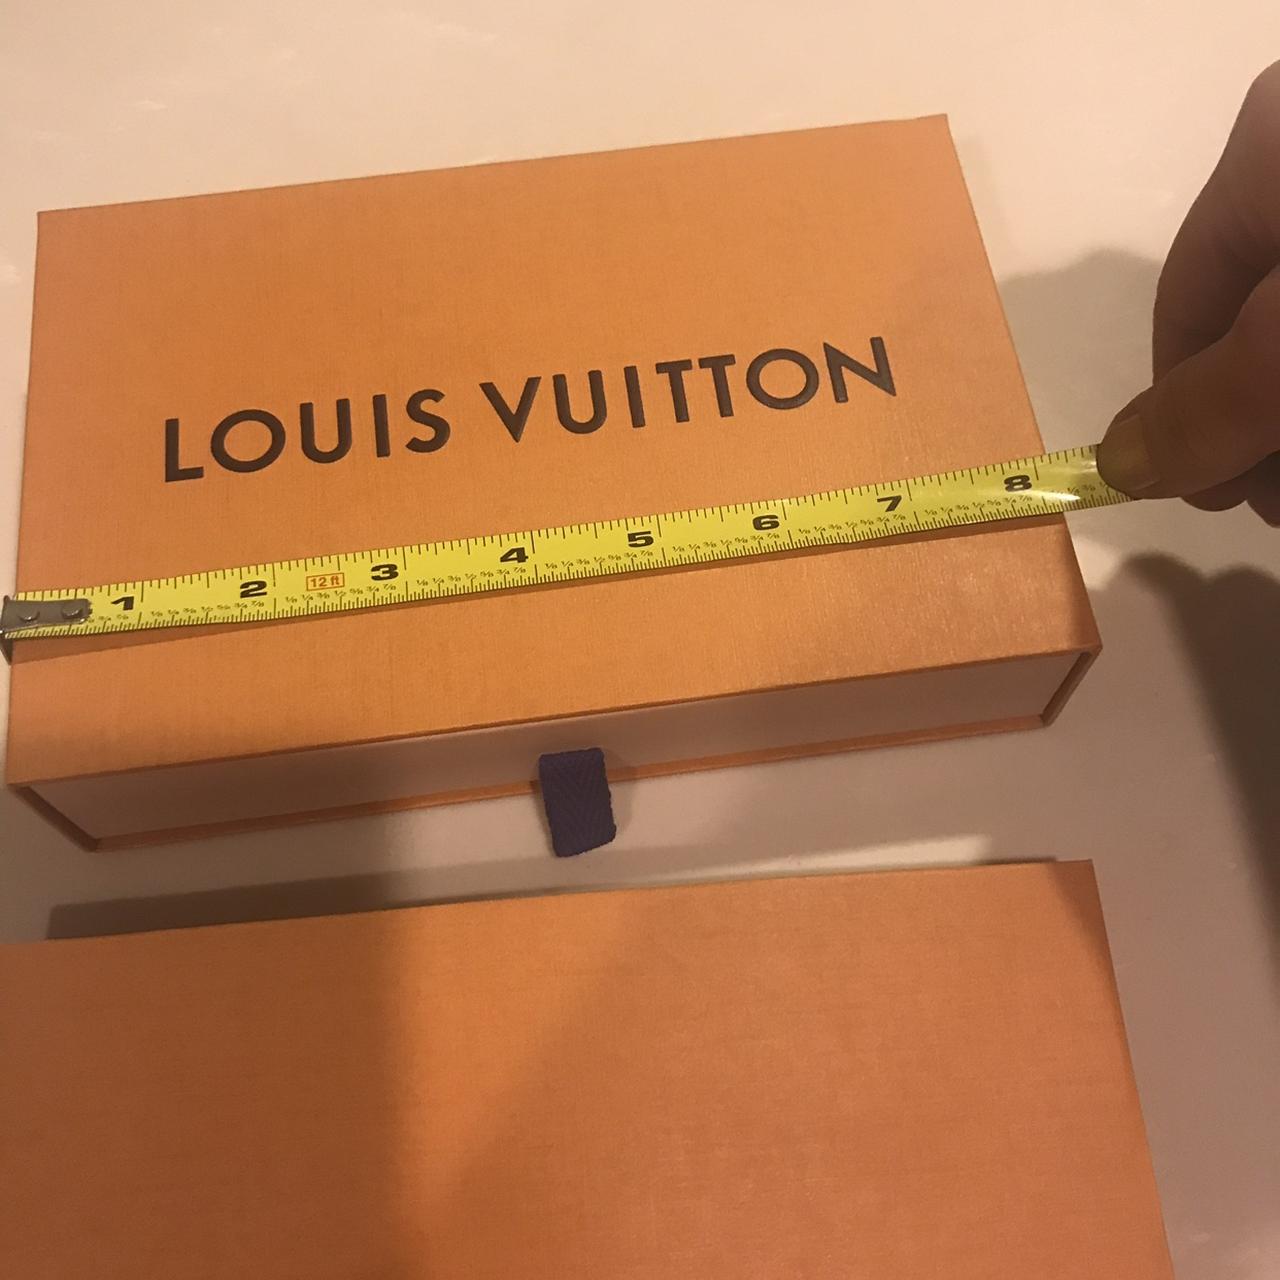 Don't think LV needed to send me this big a box 😂 : r/Louisvuitton